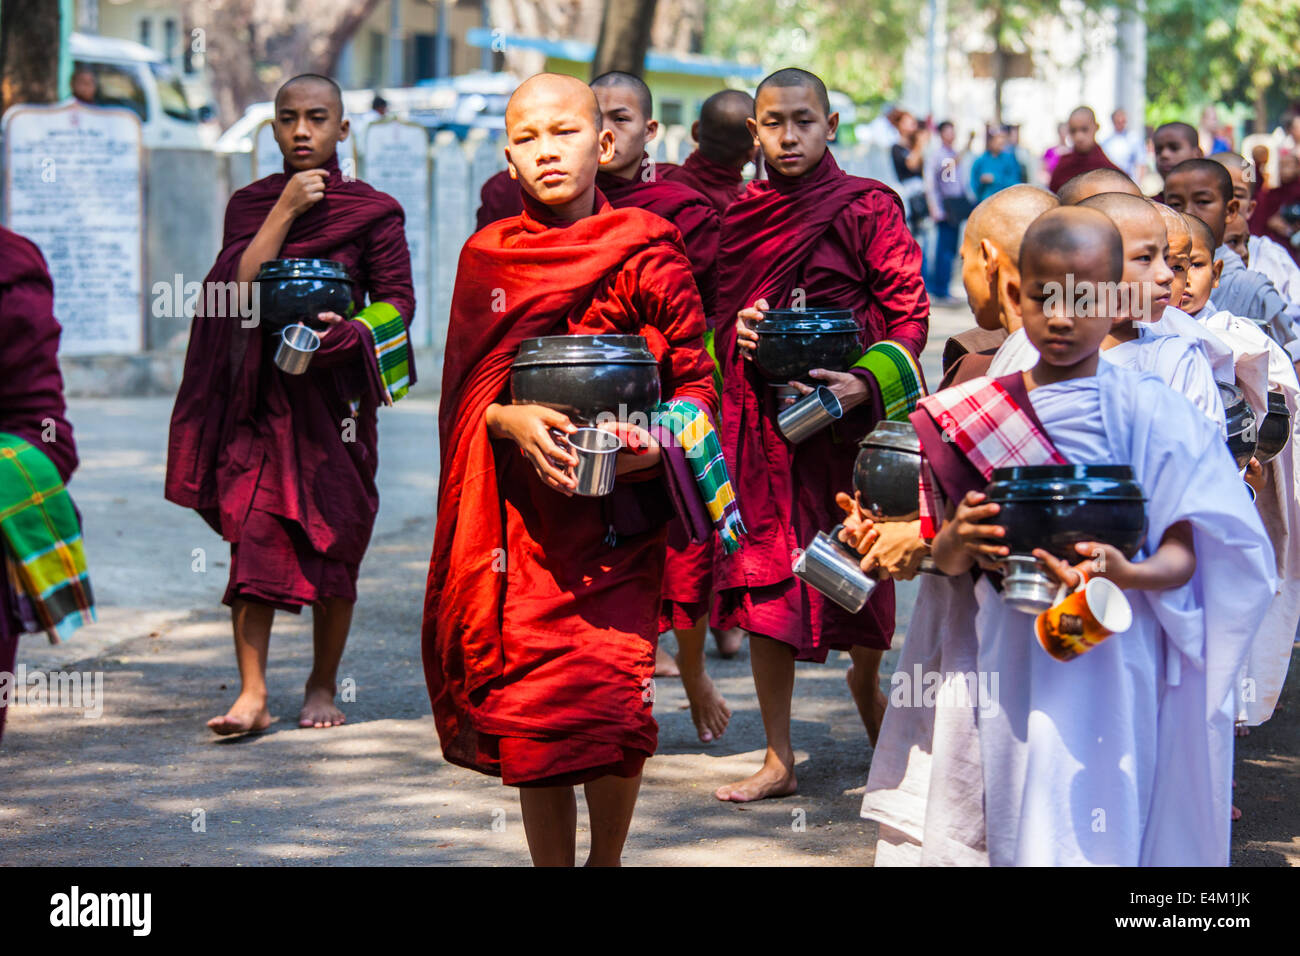 Young Buddhist monks and nuns wait in line for food at an Alms Ceremony at Maha Aung Mye Bonzan Monastery in Mandalay, Myanmar. Stock Photo